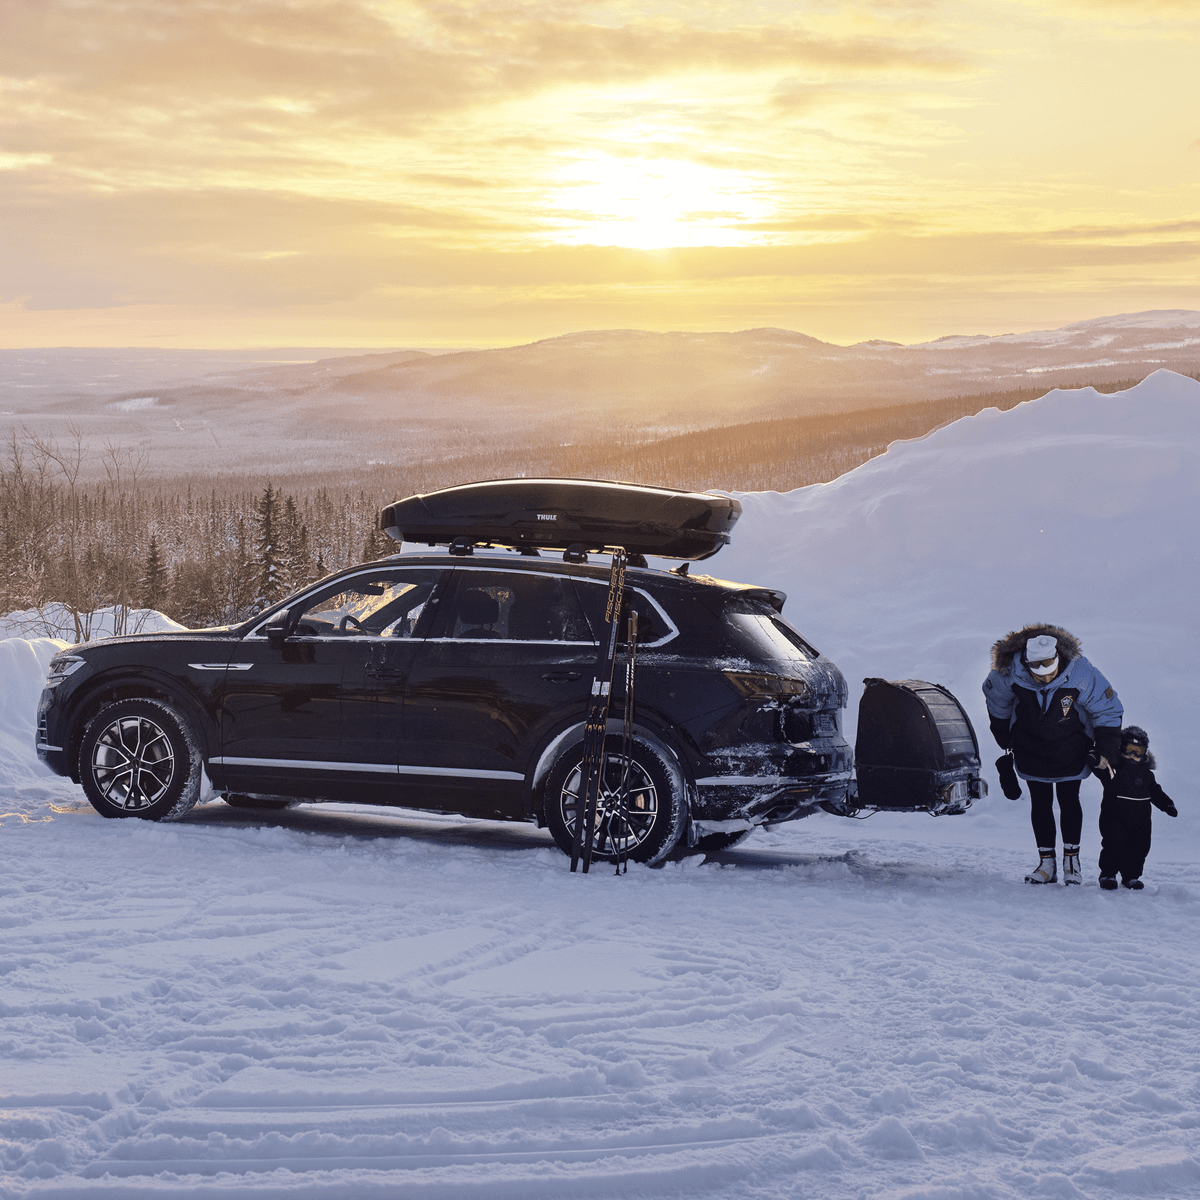 A parent with child unloading their ski gear from a car with a roof top box in a snowy landscape